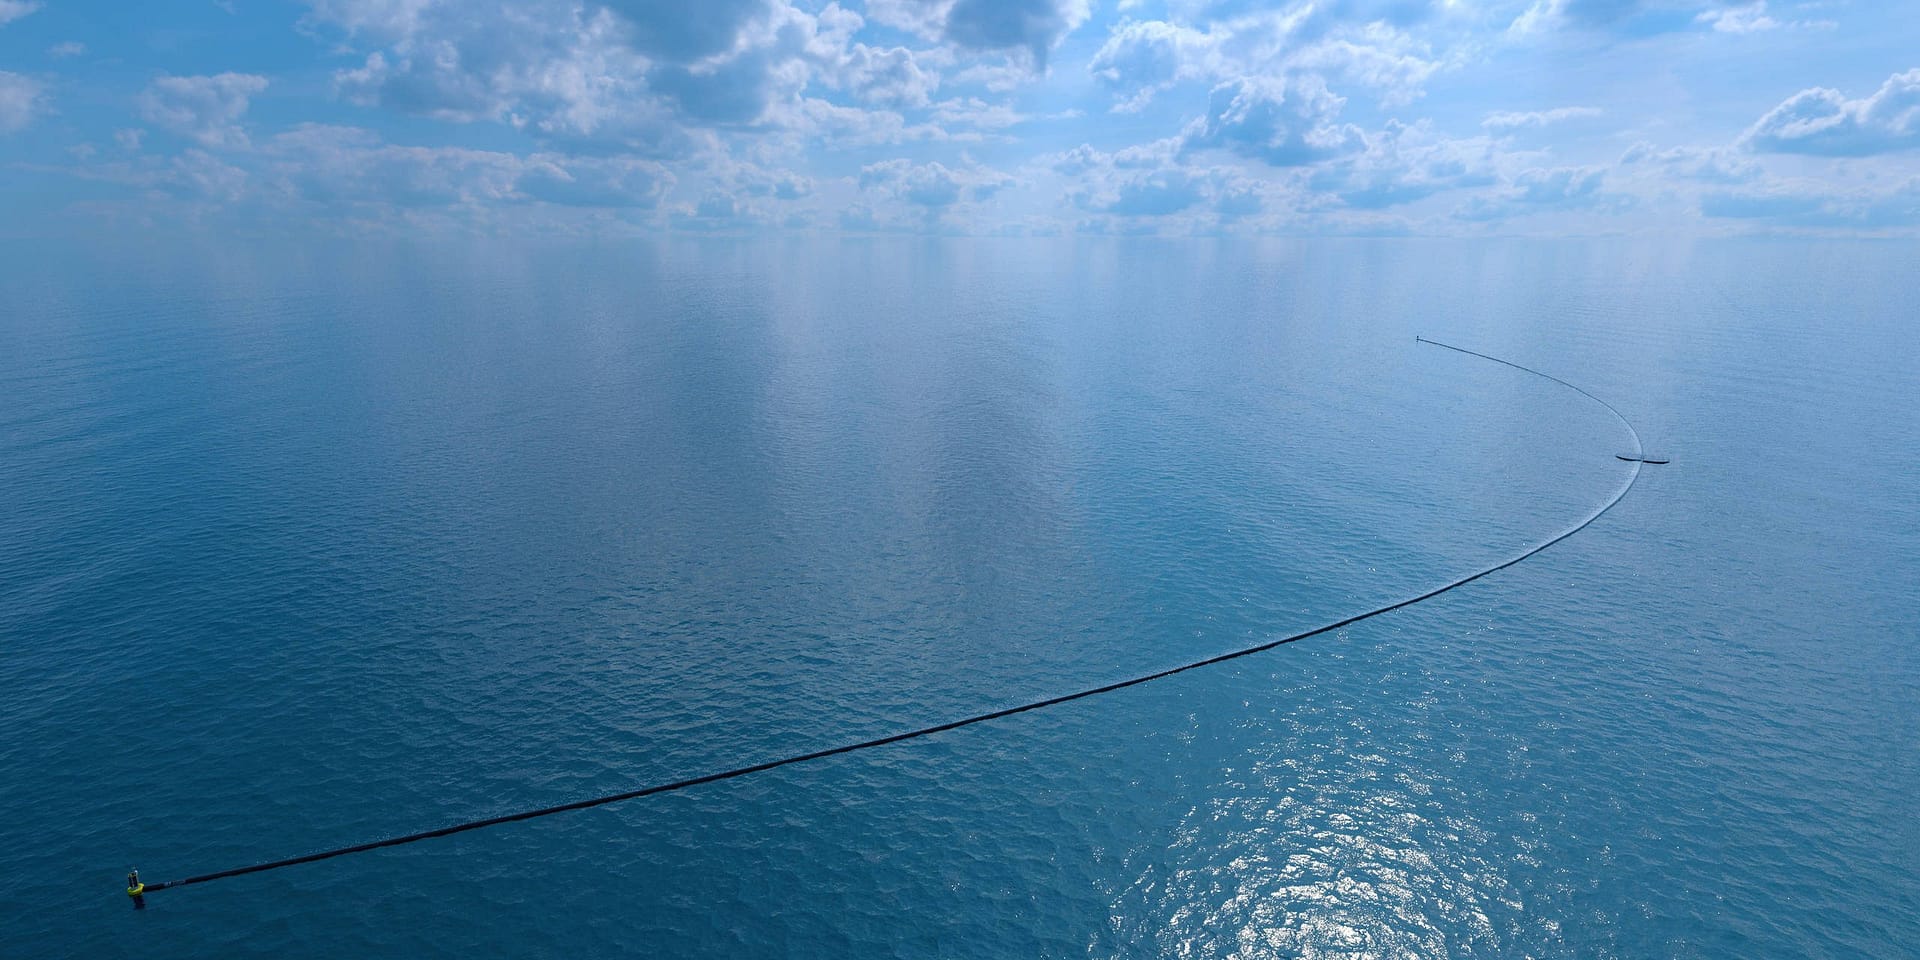 Image: Artists rendering of the Ocean Cleanup booms from the air